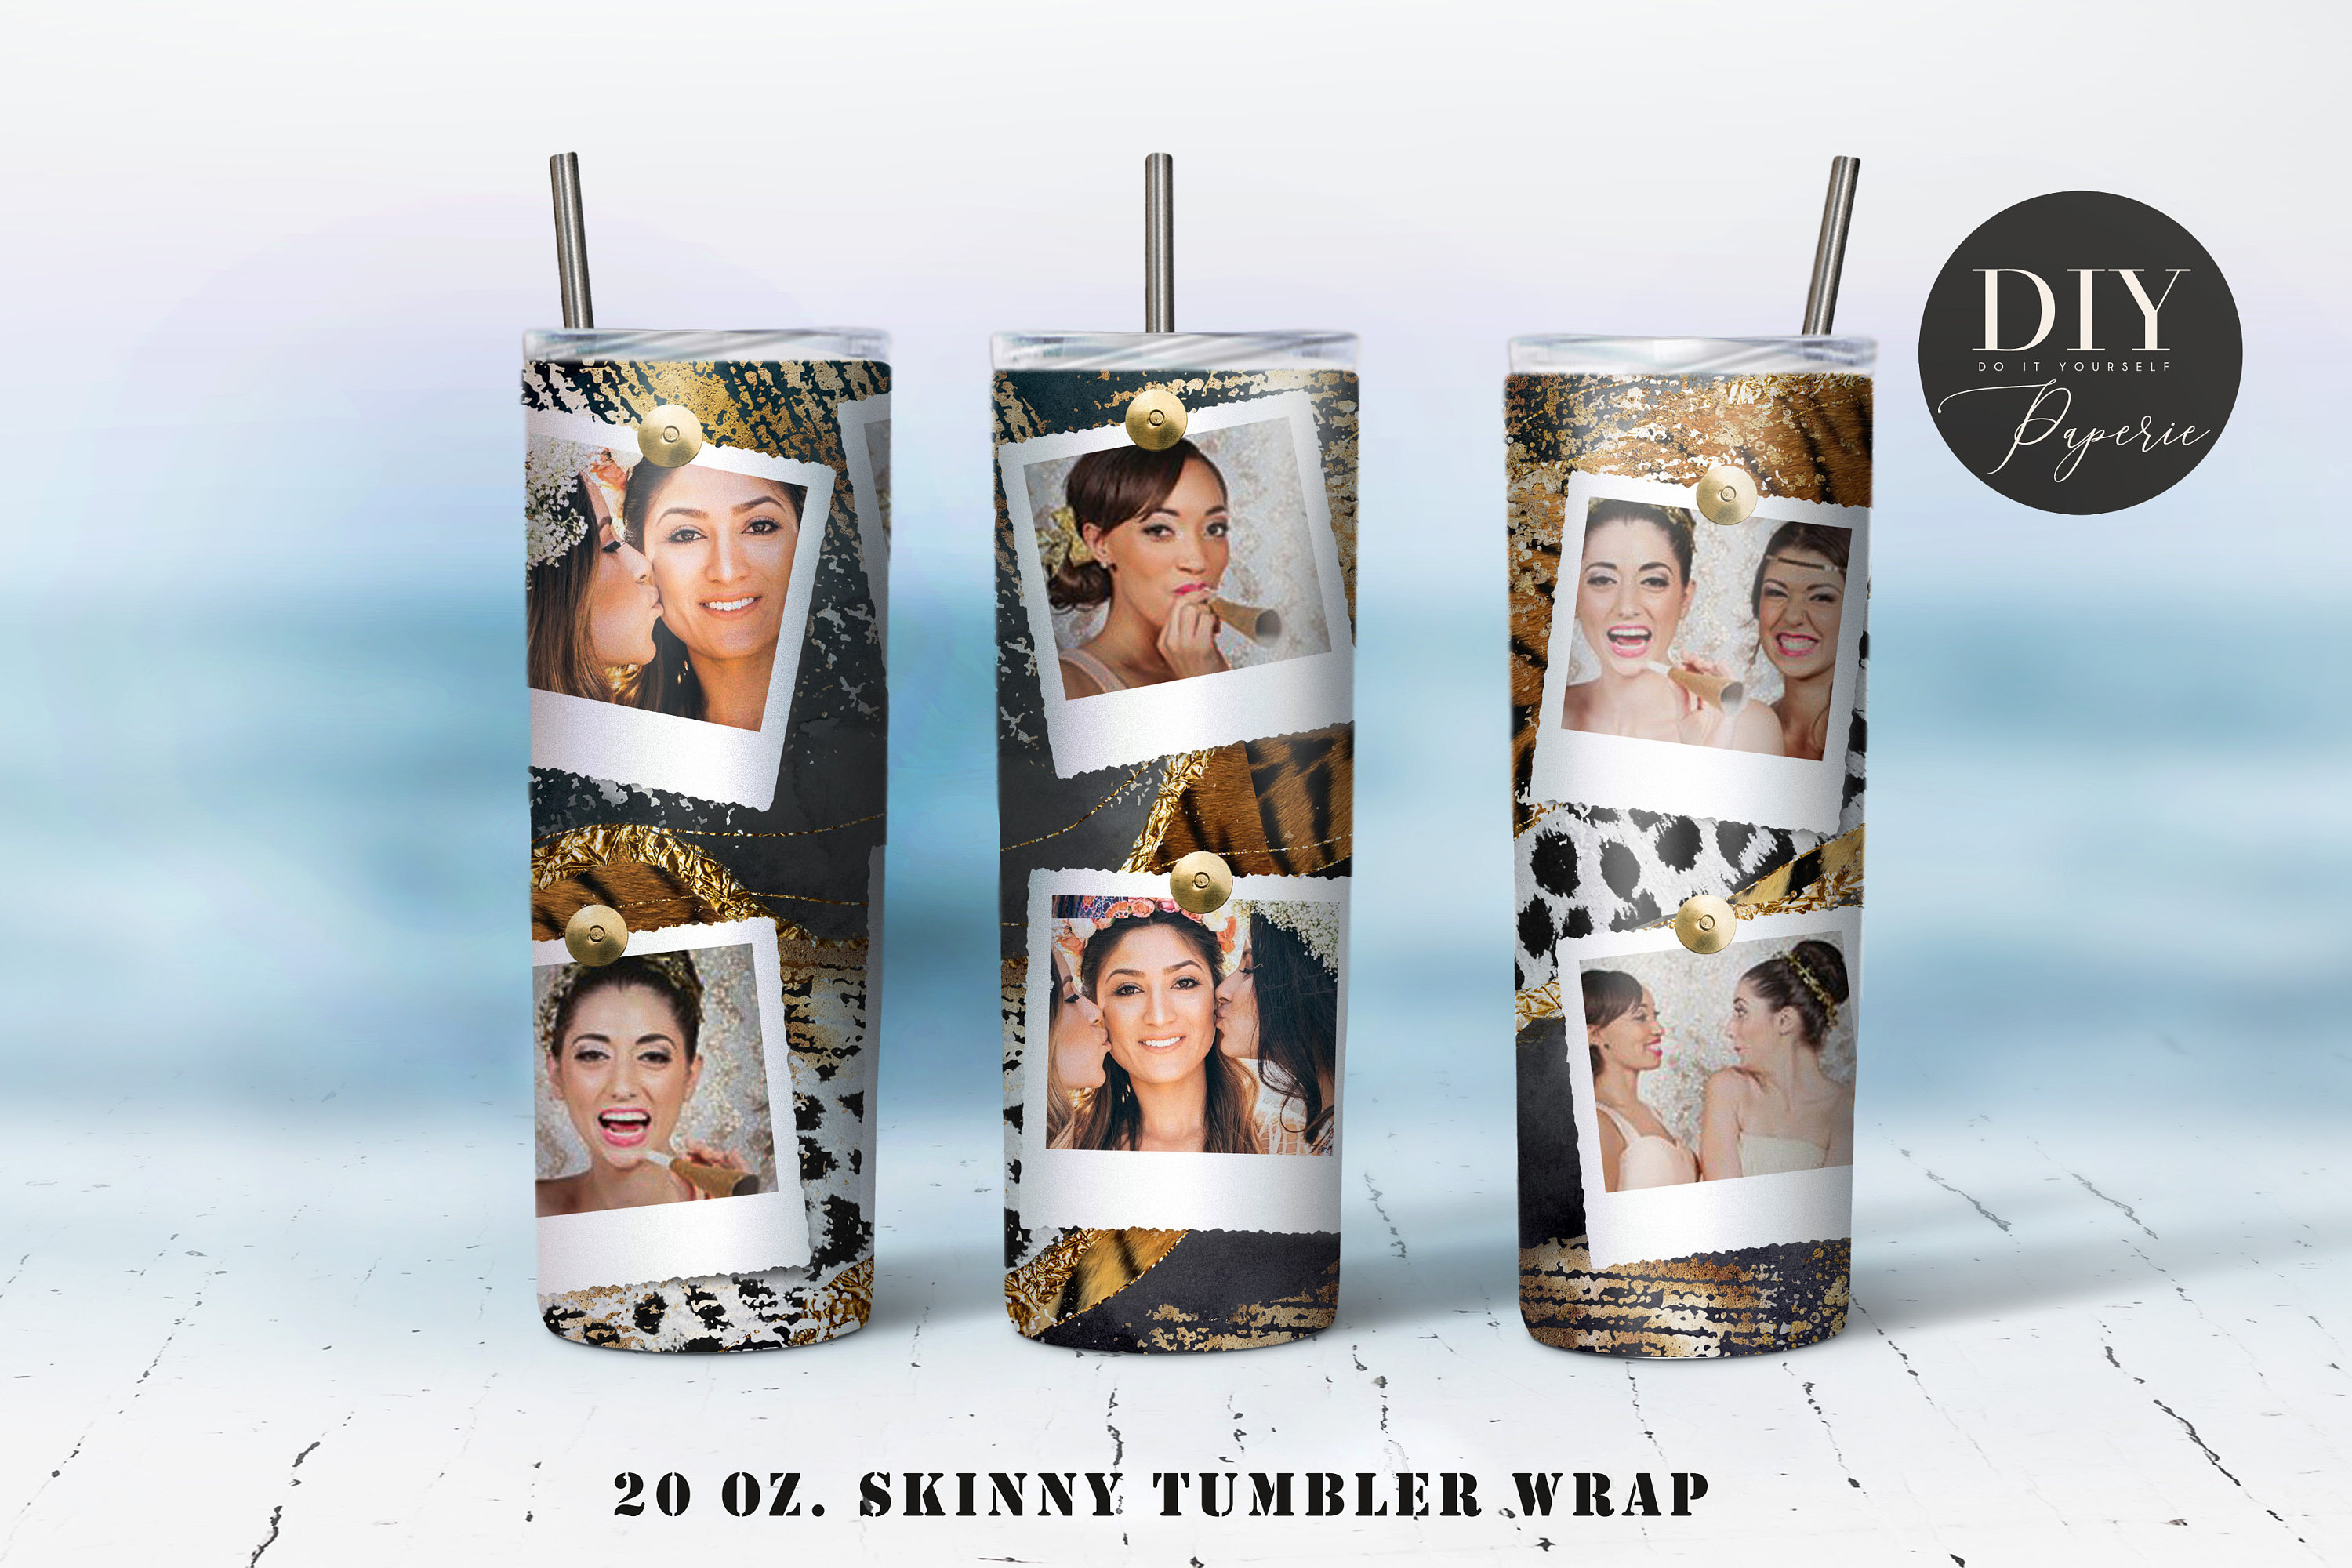 sublimation-tumbler-template-free